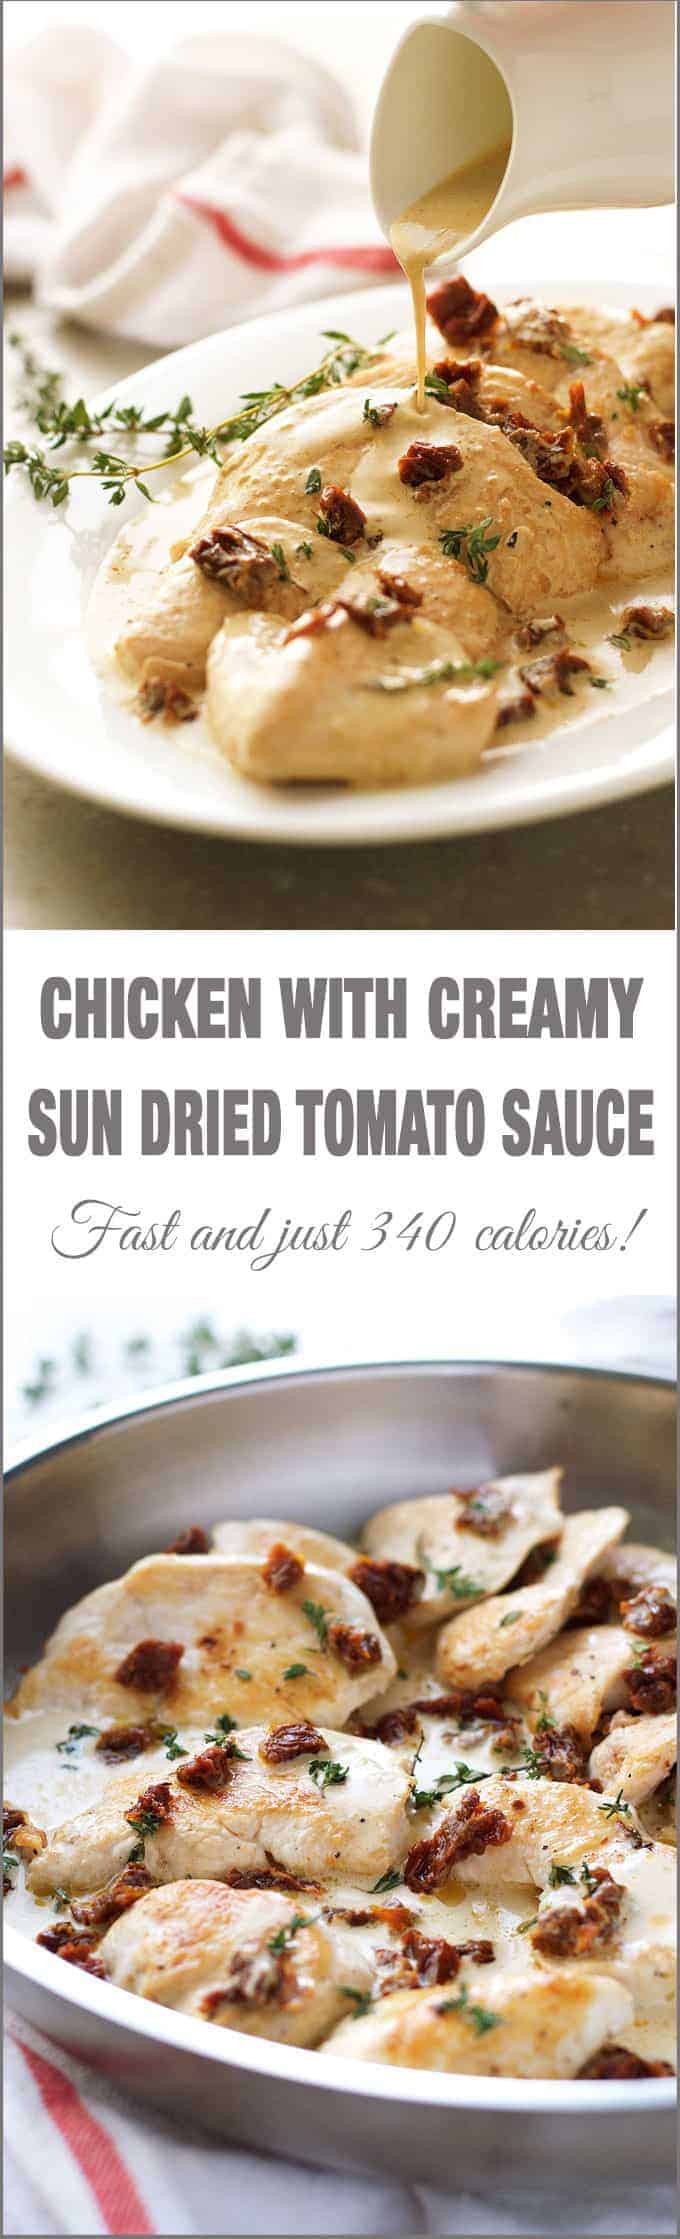 Chicken with Creamy Sun Dried Tomato Sauce - super easy and fast to make with a sauce so incredible you'll want to drink it from the skillet!